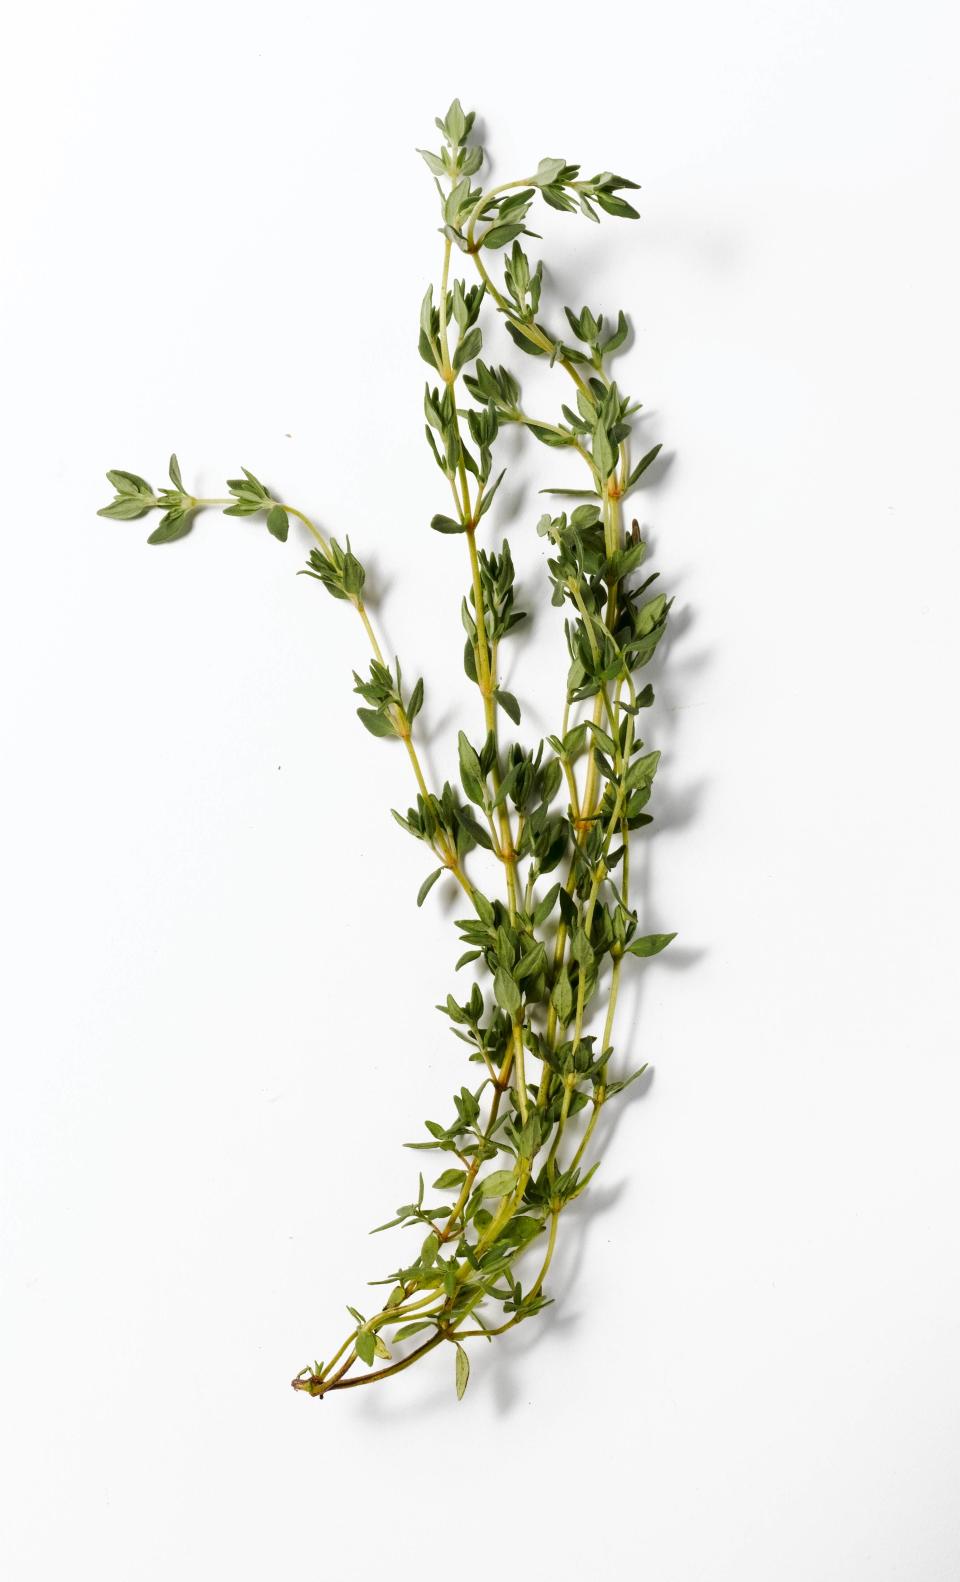 A sweet and savory and fragrant gentle giant. One Epi staffer said "I'd call thyme the Andre the Giant of the herb world, but Andre the Giant is dead." But you know what's alive—and stays alive in your fridge for almost two weeks? Thyme.